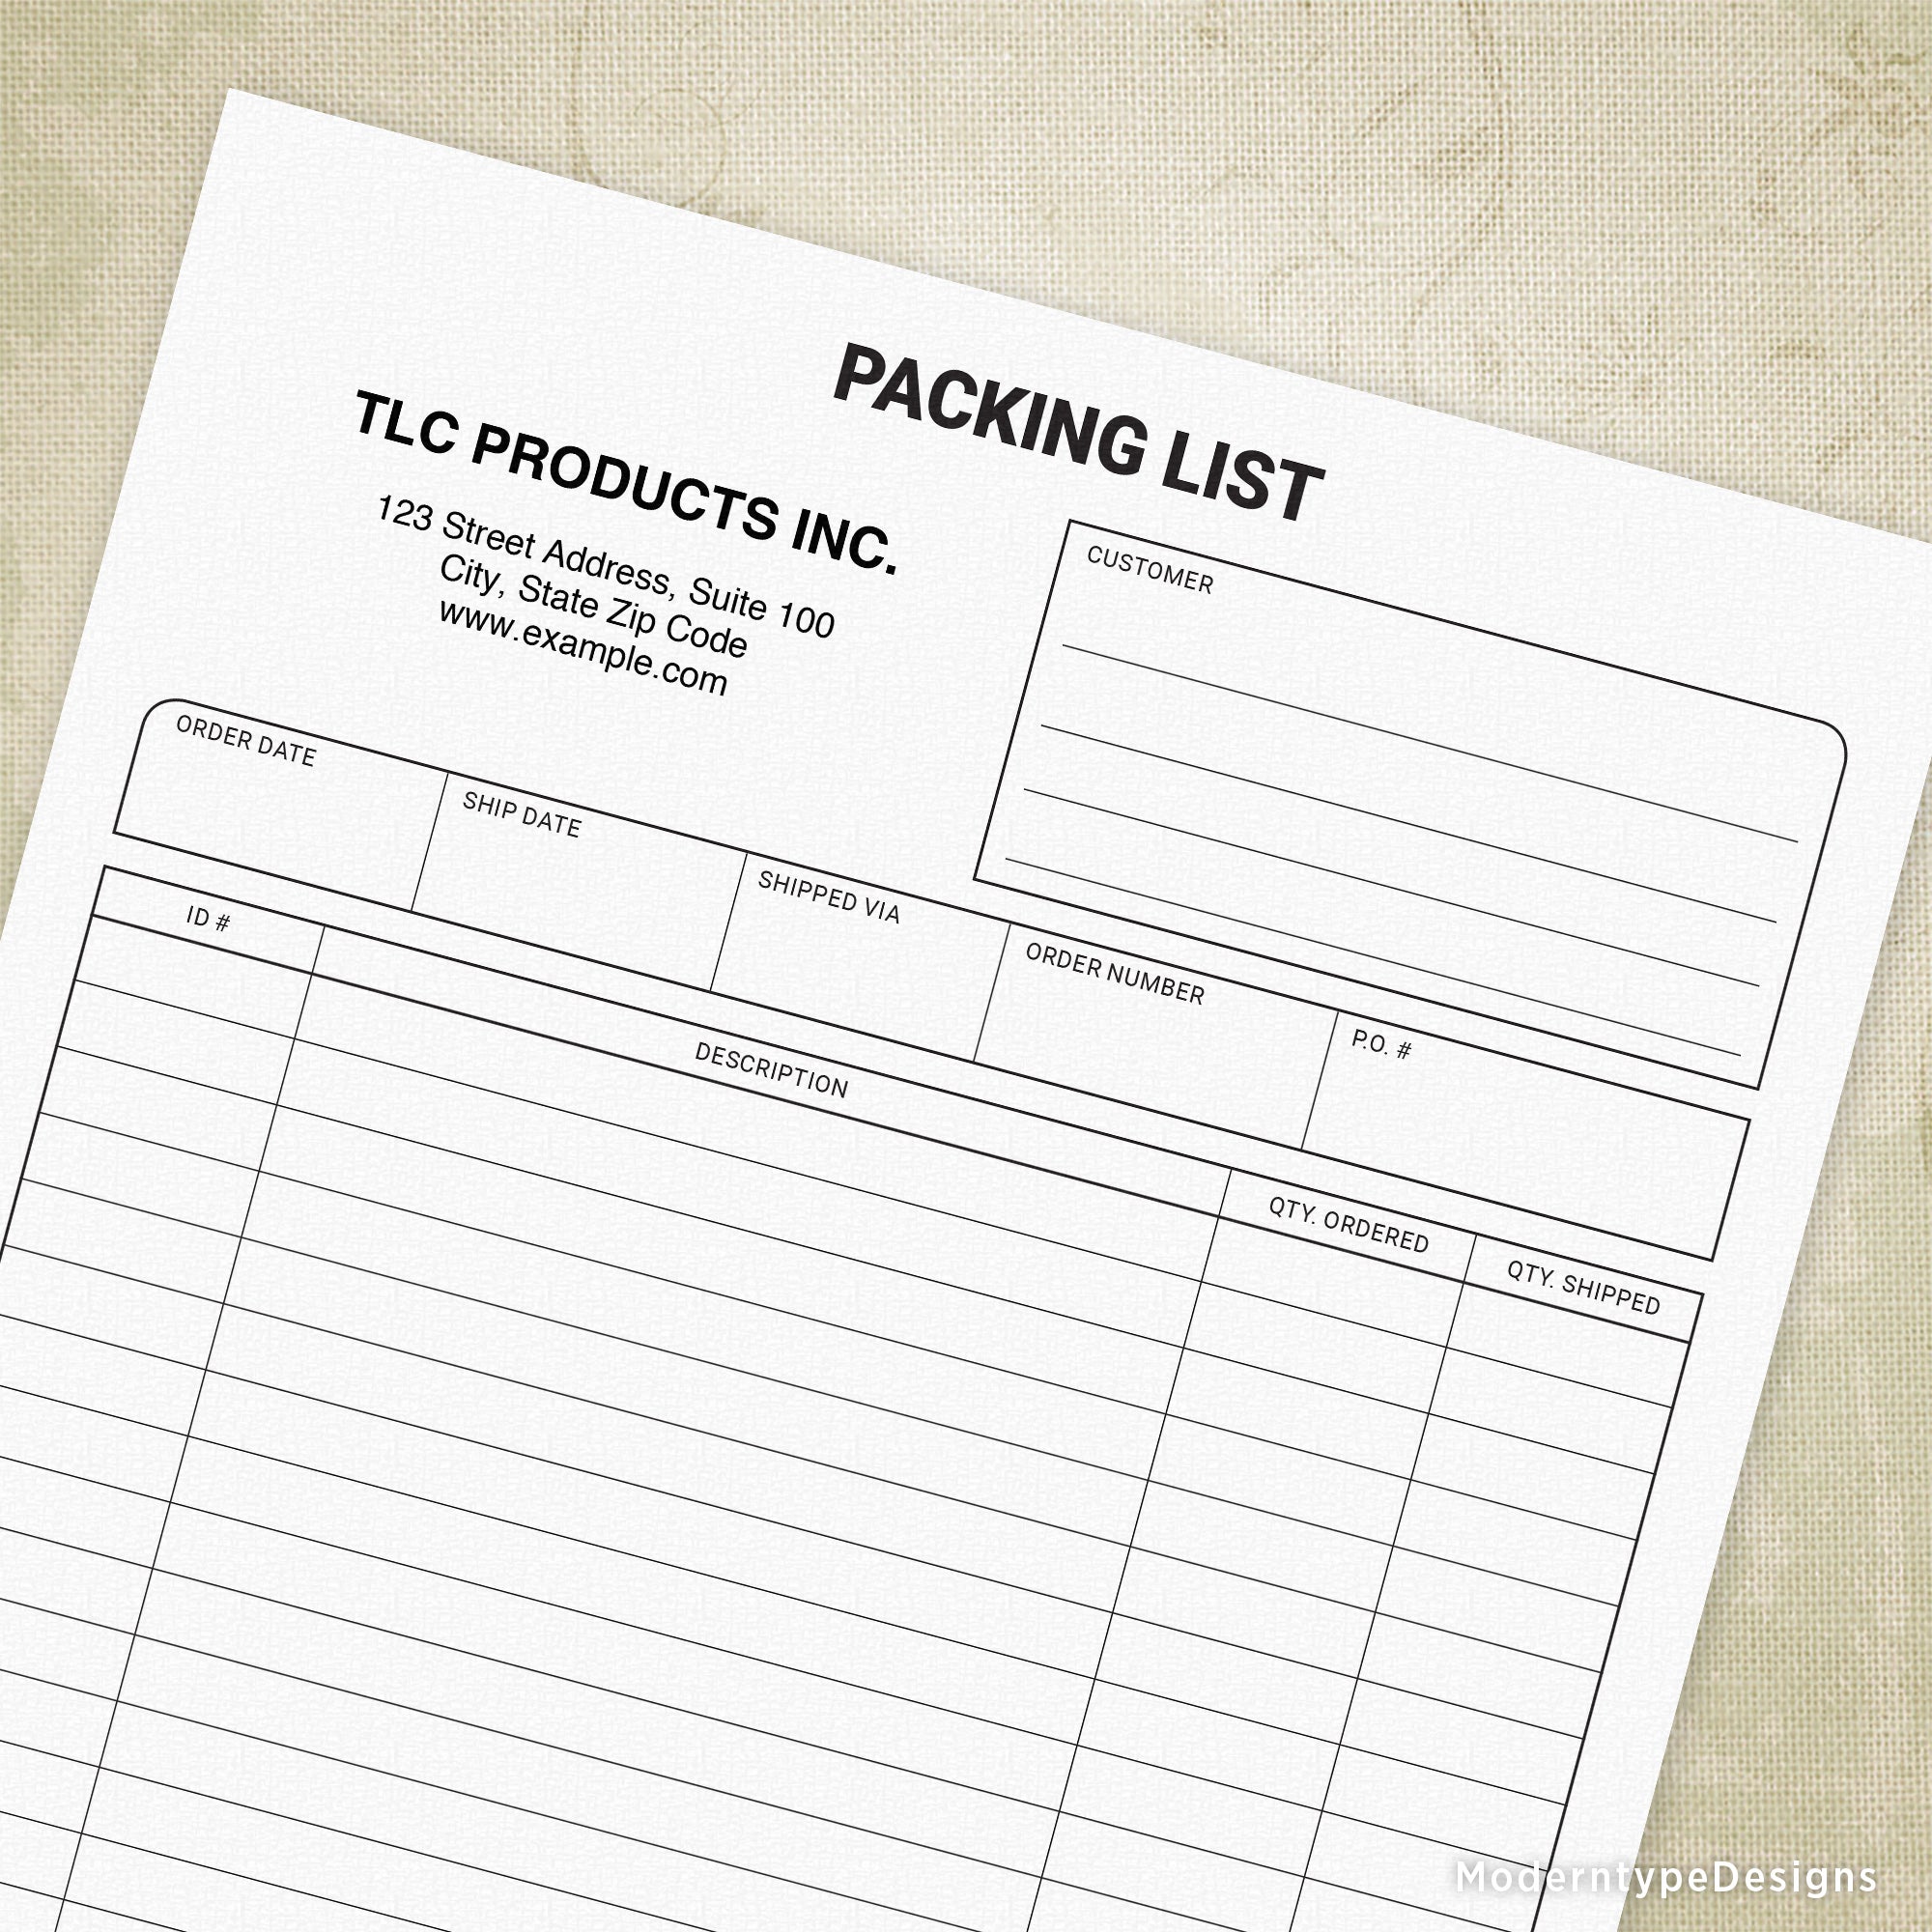 Packing List Printable Form, Personalized